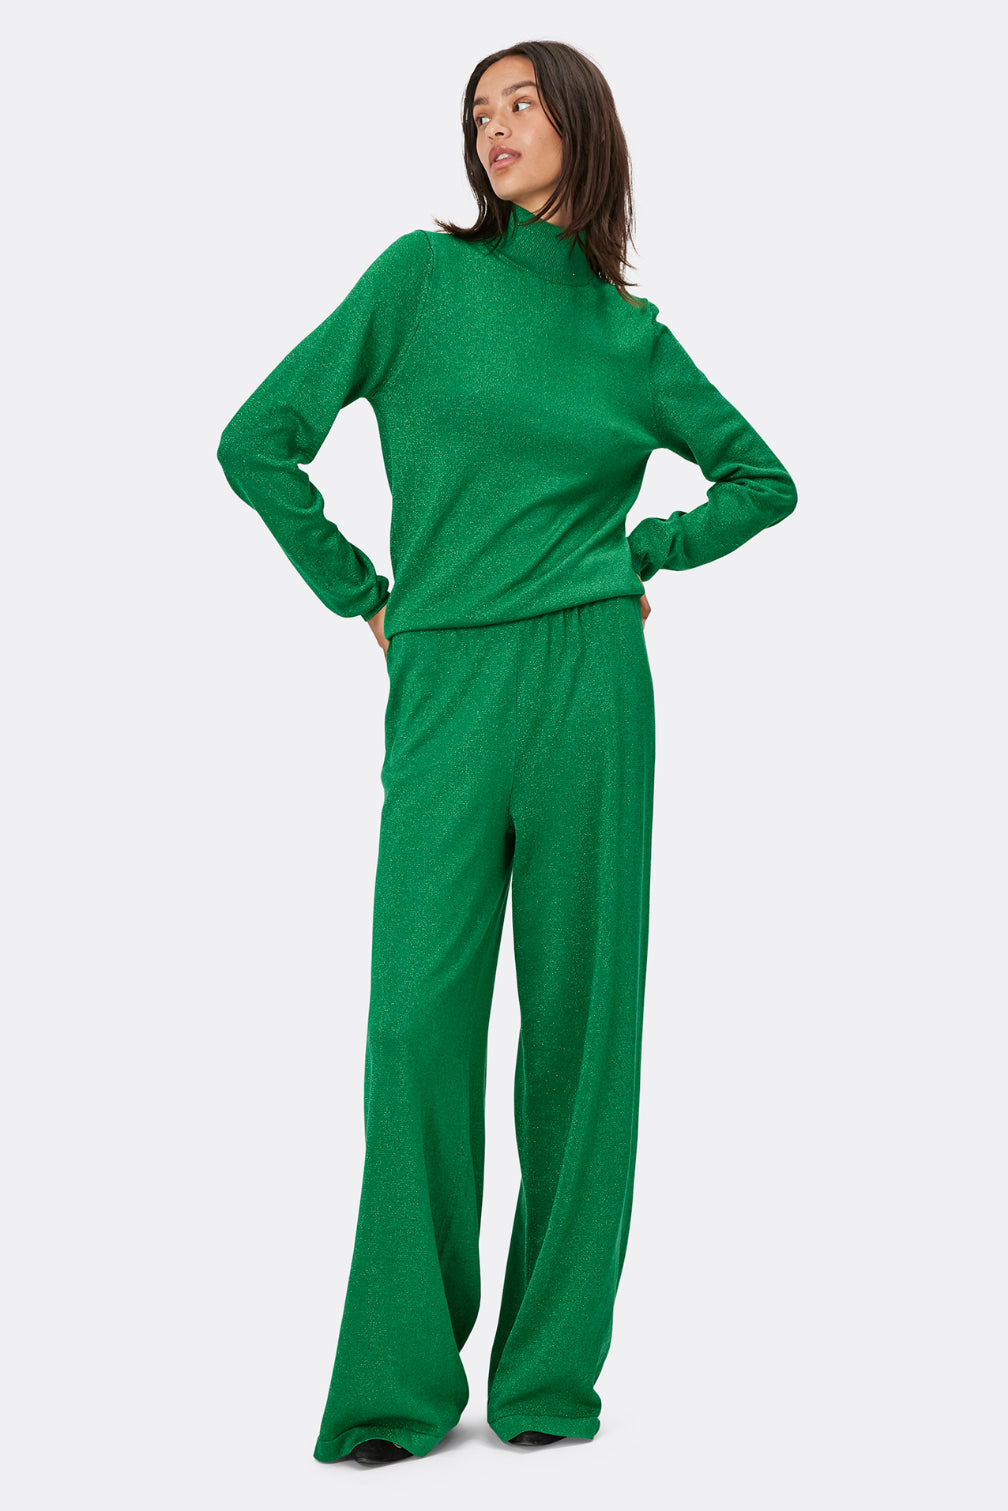 Lollys Laundry Beaumont Jumper - Green